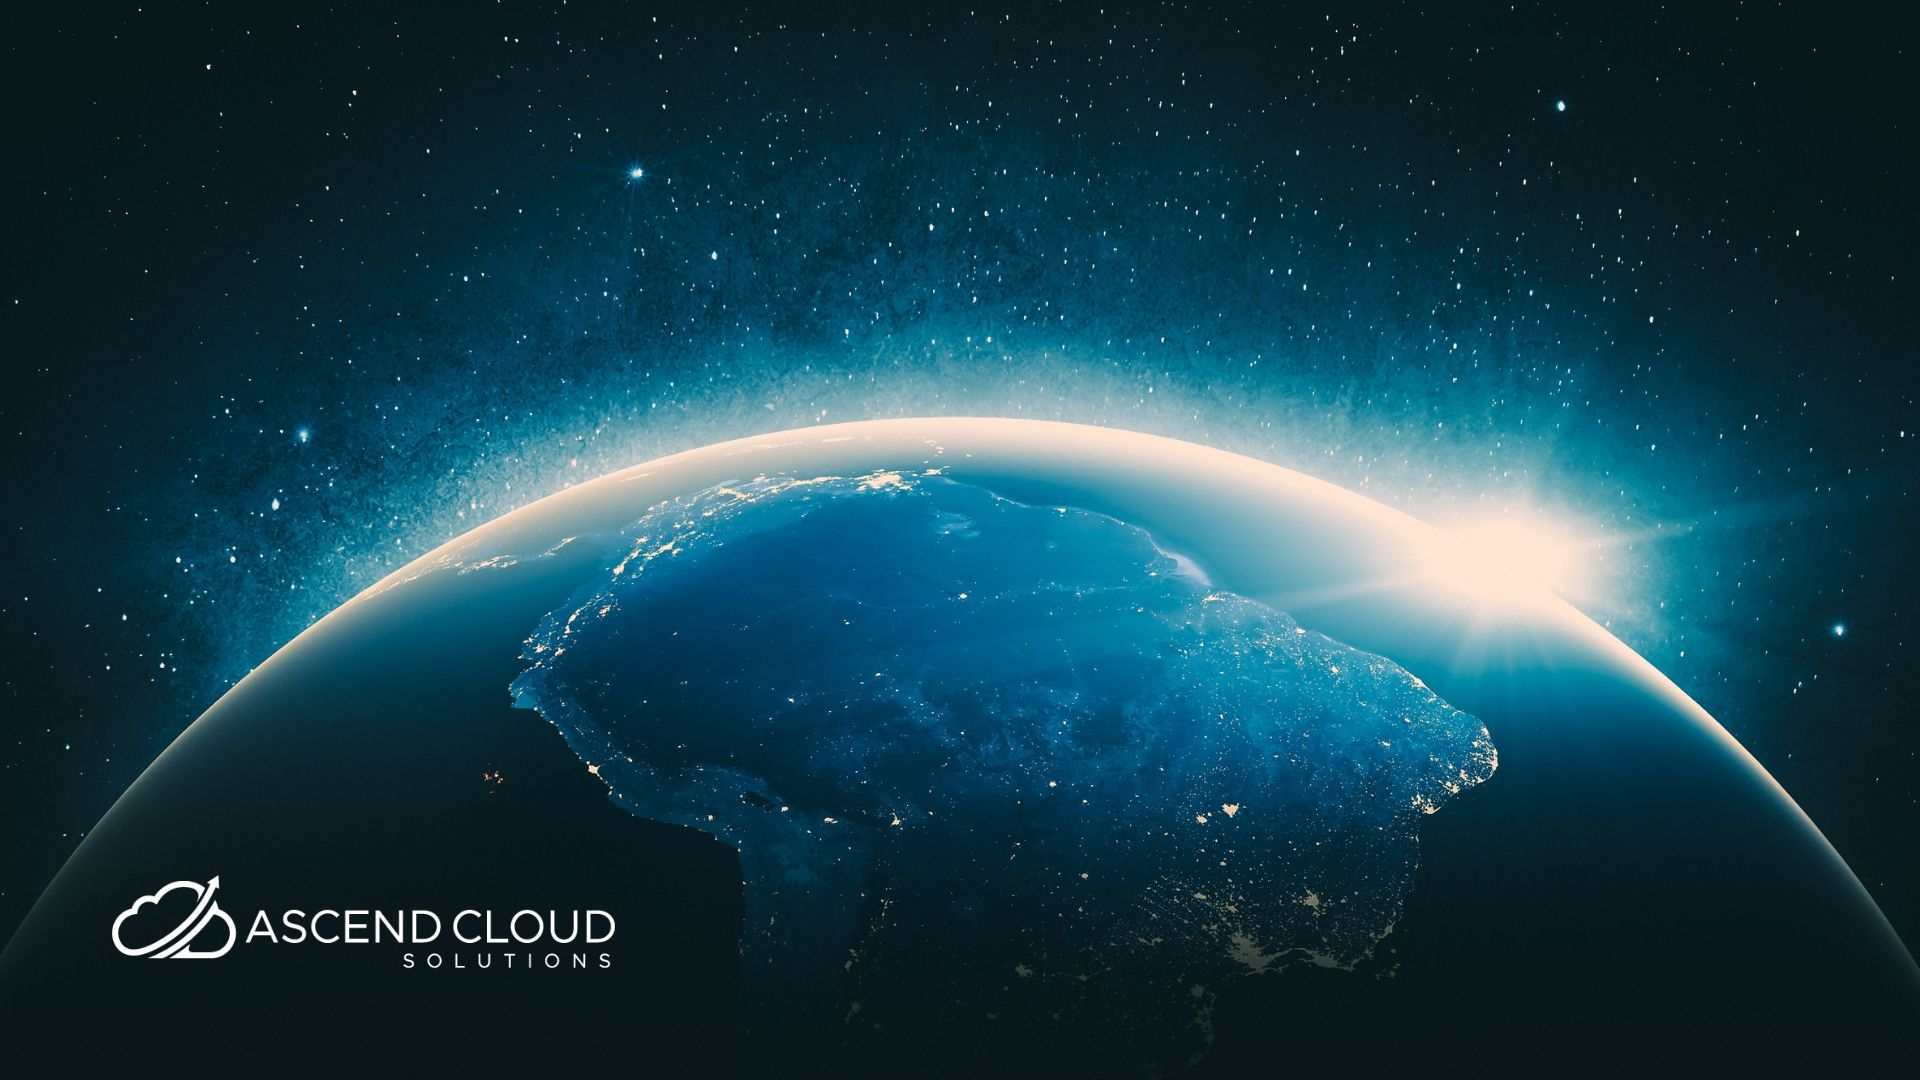 When it comes to the cloud, Latin America is a mixed bag. On the one hand, it faces unique problems. On the other, investment is on the rise. Learn more.
